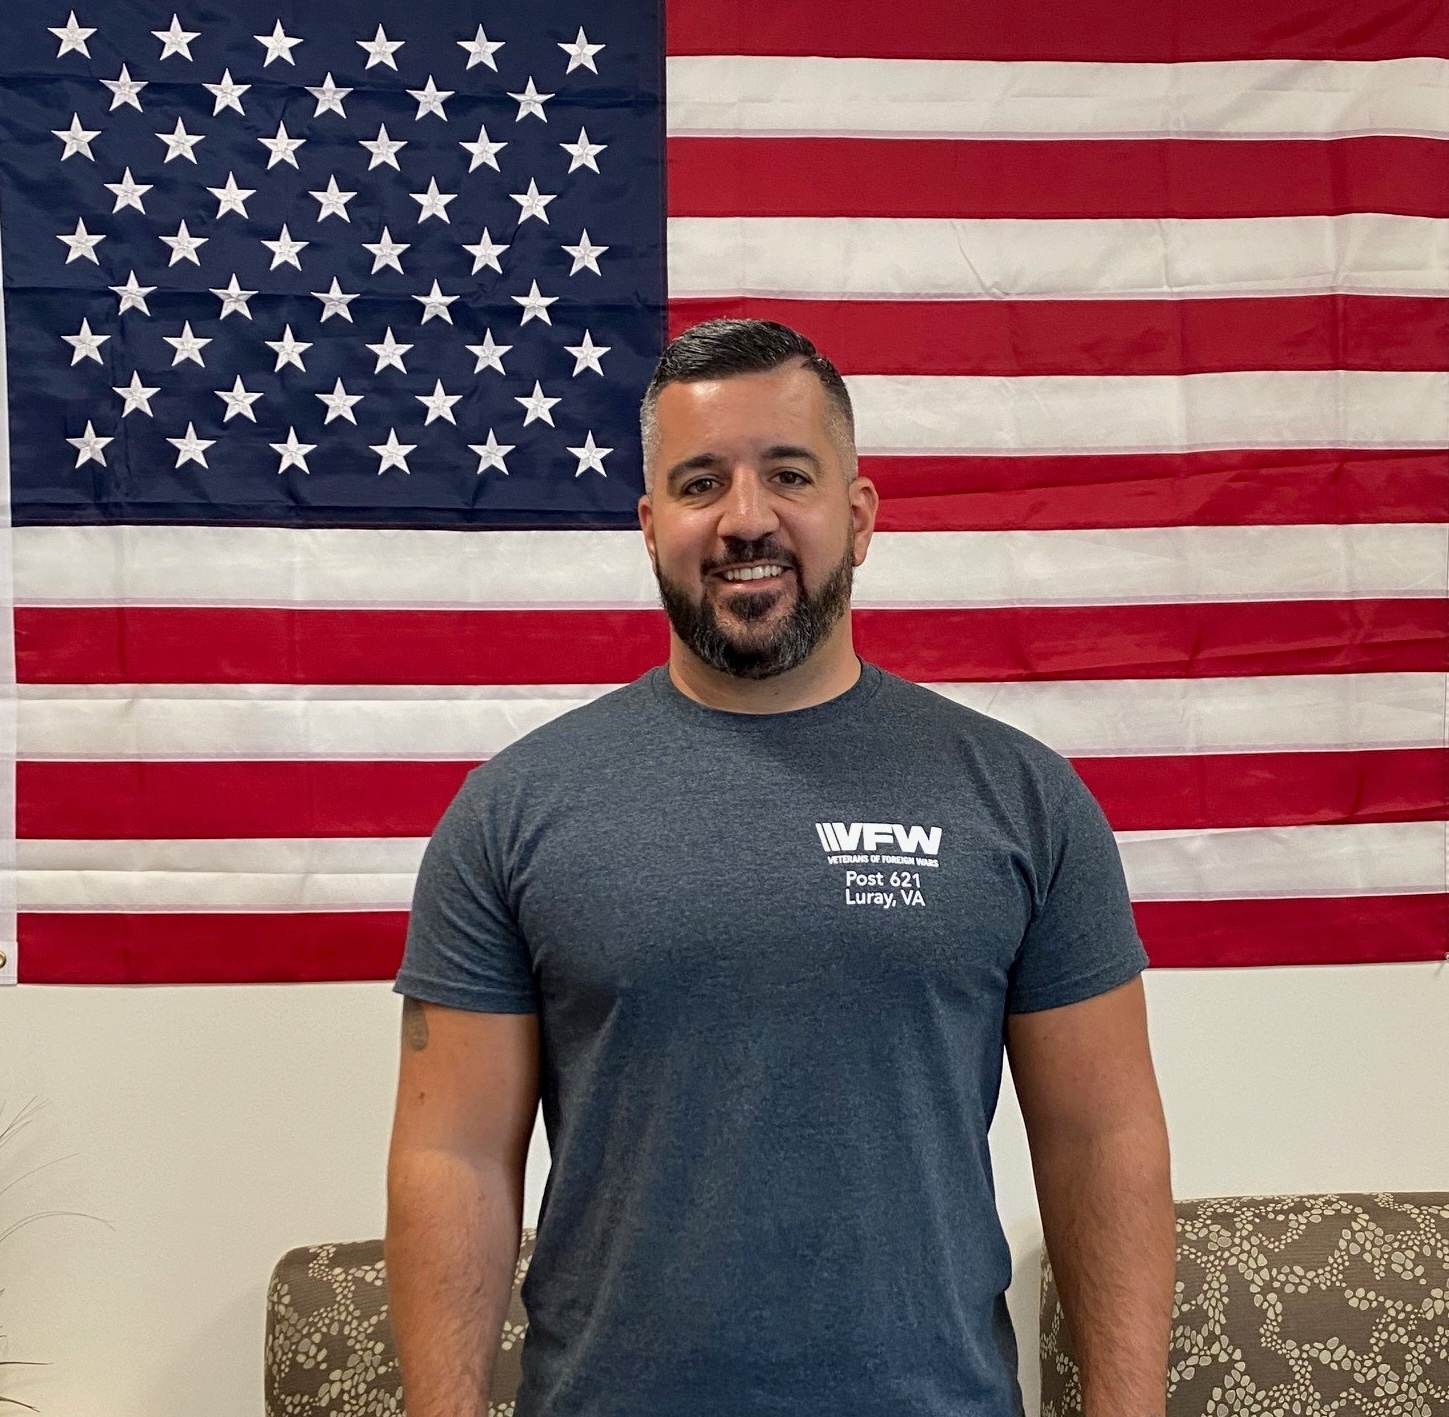 Photo of Brandon Tester in front of USA flag.